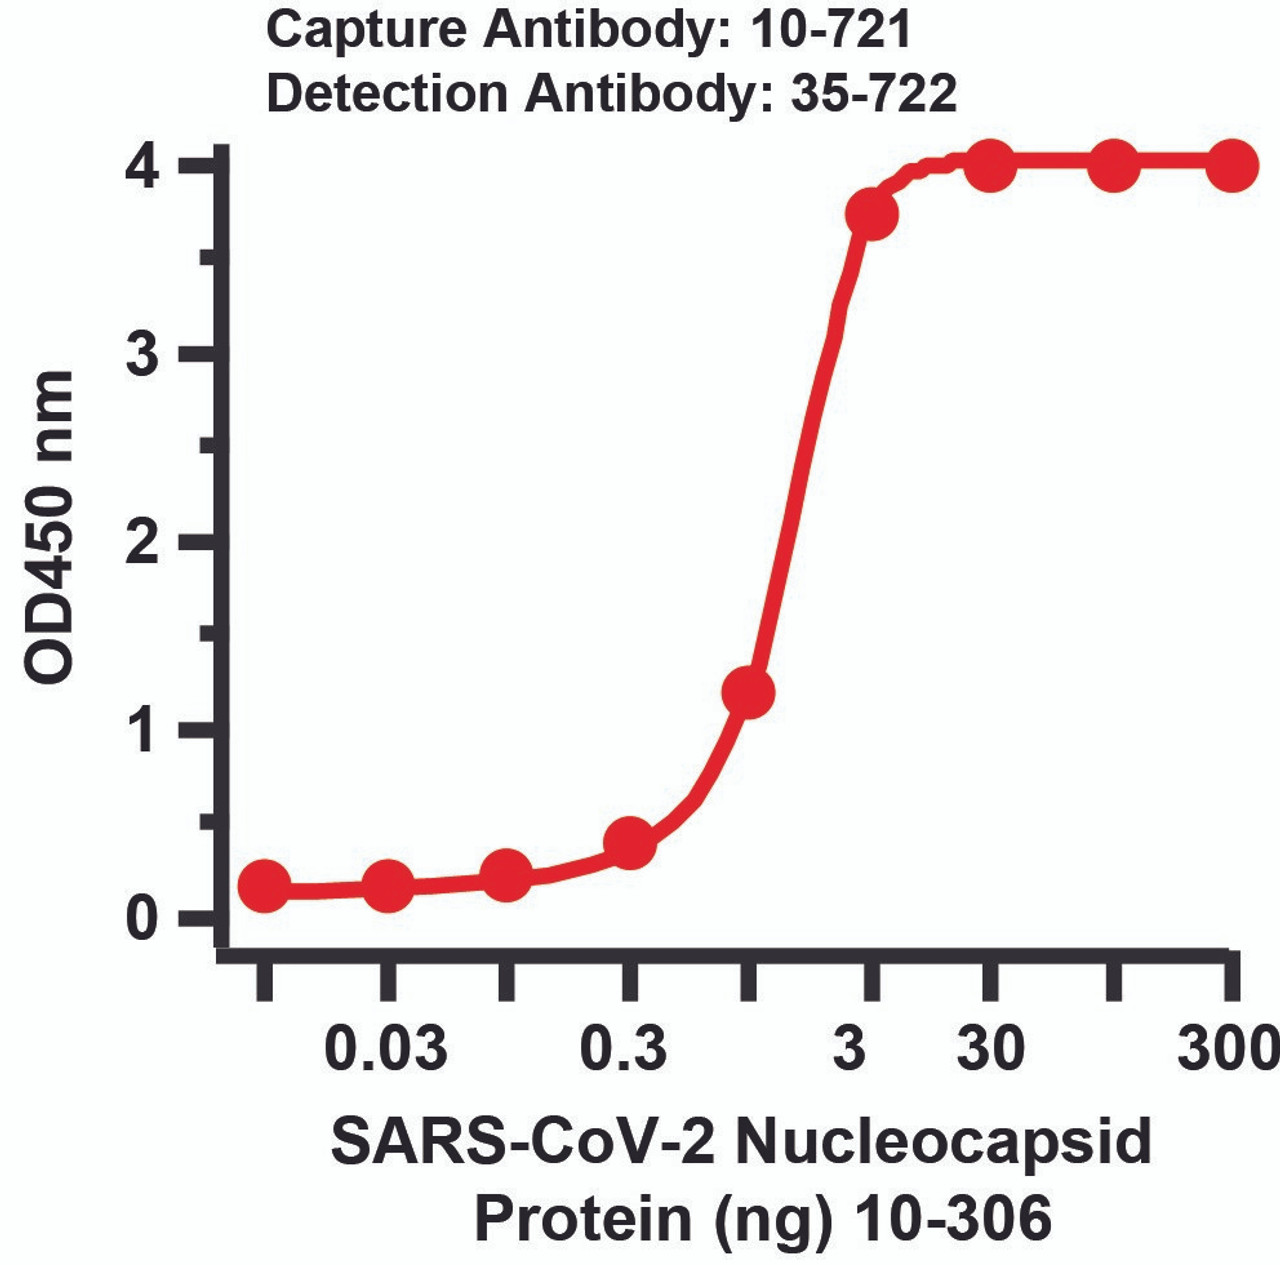 <strong>Figure 2 Sandwich ELISA for SARS-CoV-2 (COVID-19) Matched Pair Nucleocapsid Antibodies</strong><br>
Antibodies: SARS-CoV-2 (COVID-19) Nucleocapsid Antibodies, 10-721 and 35-722. A sandwich ELISA was performed using SARS-CoV-2 Nucleocapsid antibody (10-721, 2ug/ml) as capture antibody, the Nucleocapsid recombinant protein as the binding protein (10-306) , and the anti-SARS-CoV-2 Nucleocapsid antibody (35-722, 0.5ug/ml) as the detection antibody. Secondary: Goat anti-mouse IgG HRP conjugate at 1:20000 dilution. Detection range is from 0.03 ng to 300 ng. EC50 = 4.27 ng